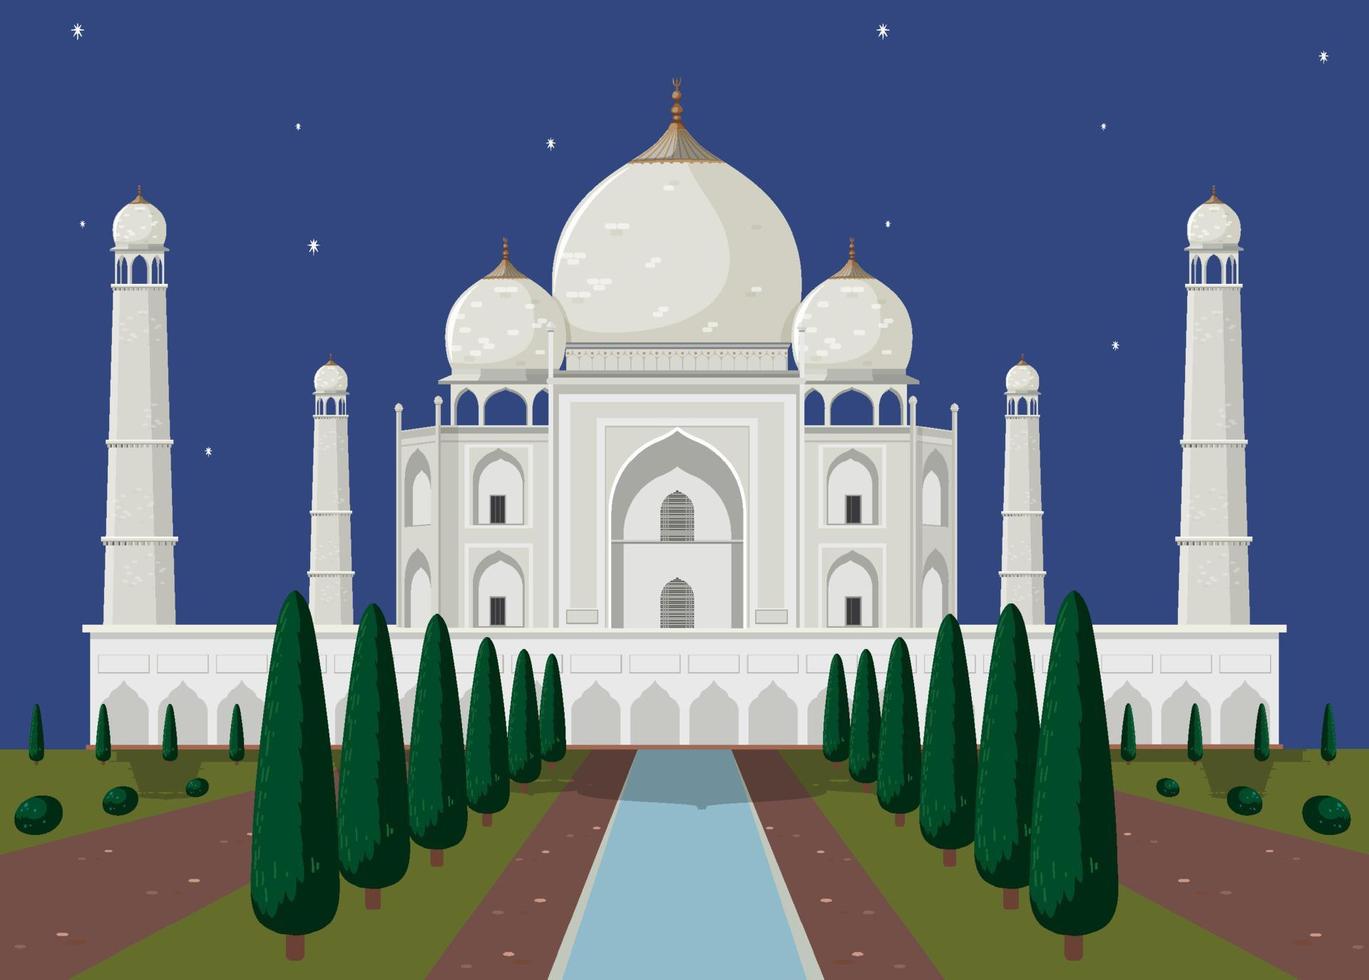 Scene of Indian temple at night vector